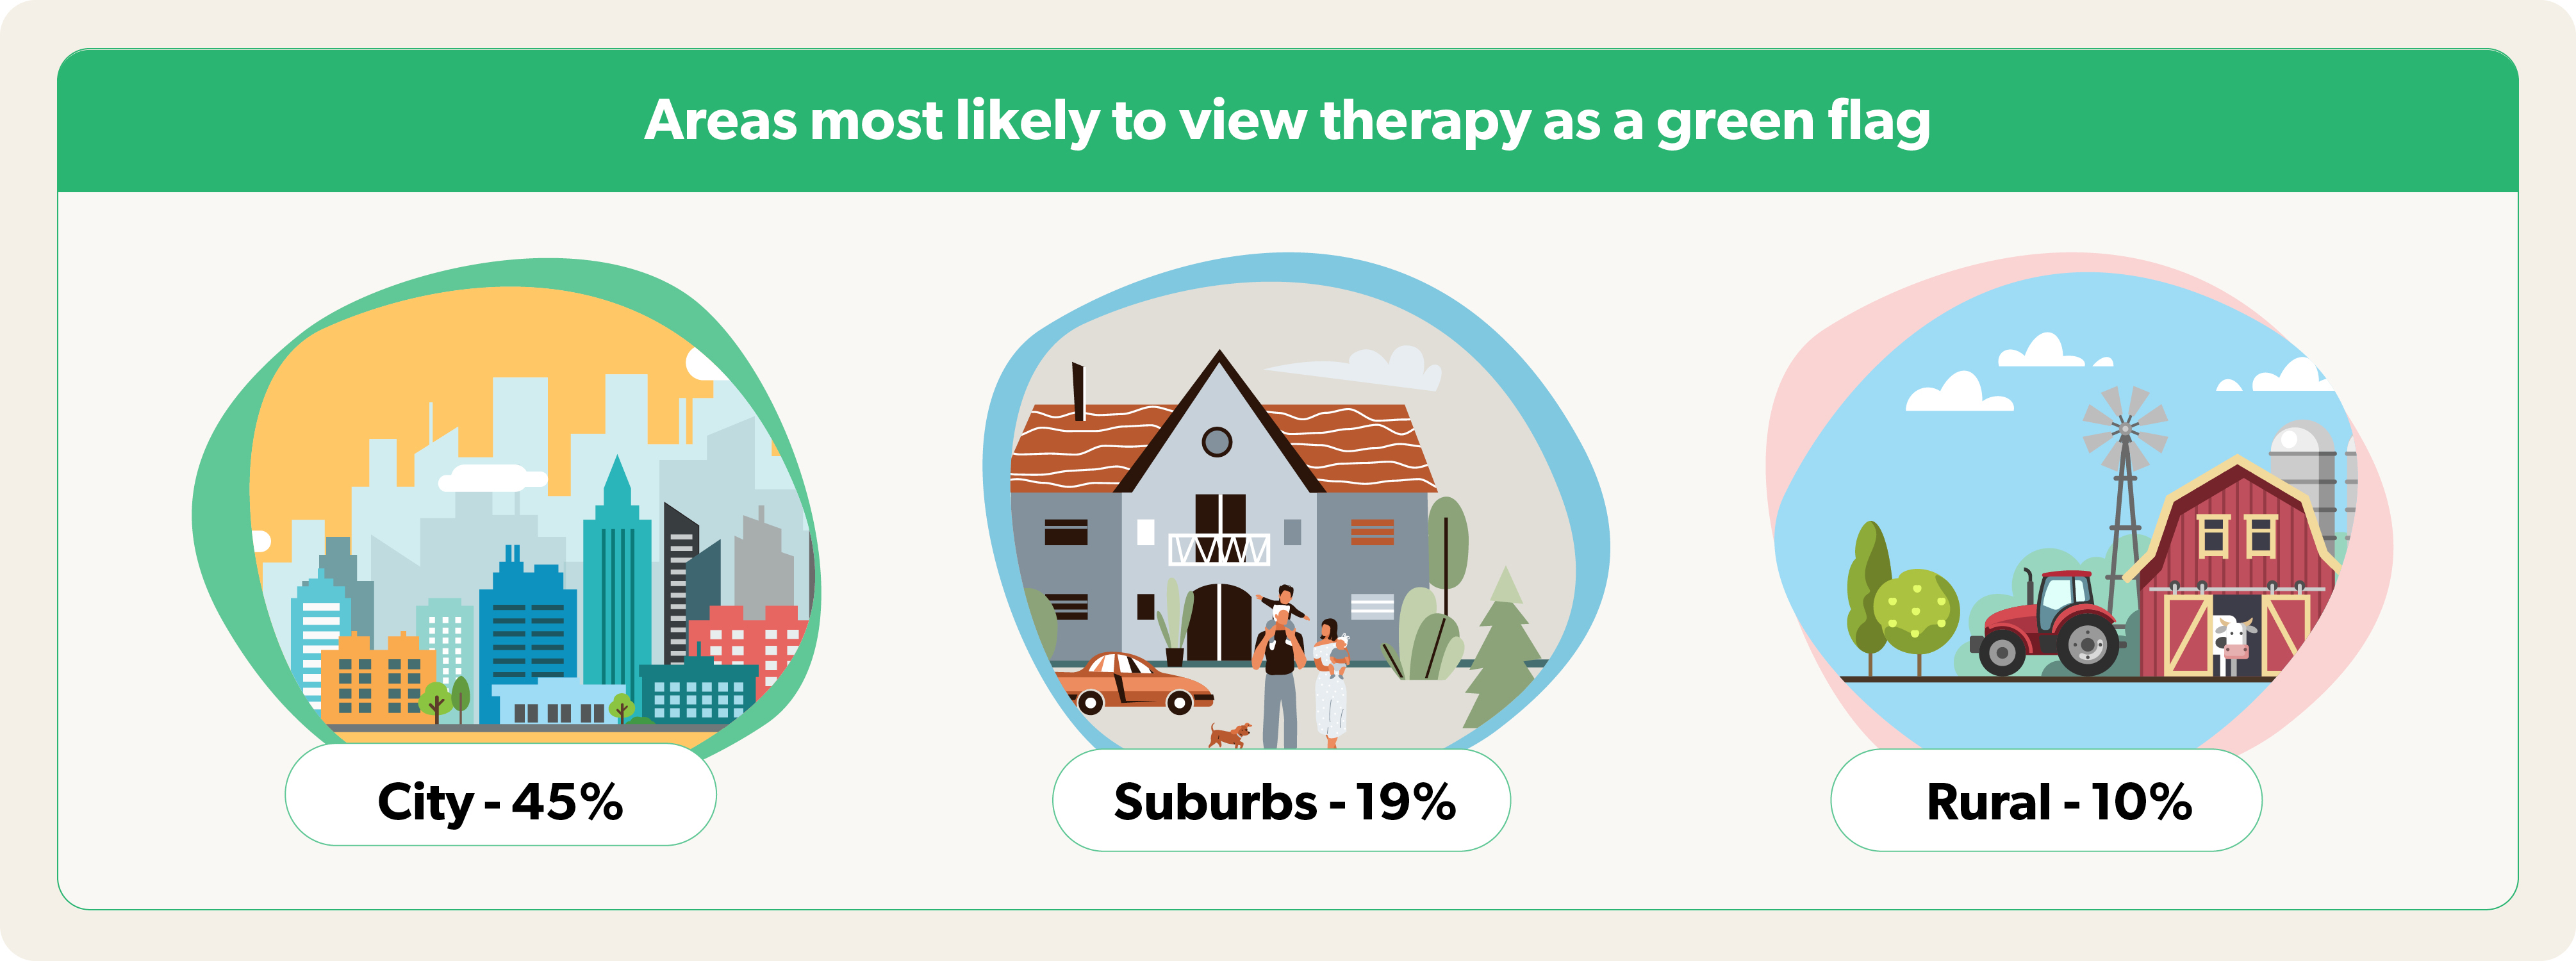 45% of people in cities are likely to see therapy as green flag, while 19% of those in suburbs and 10% of those in rural areas are likely to do so.